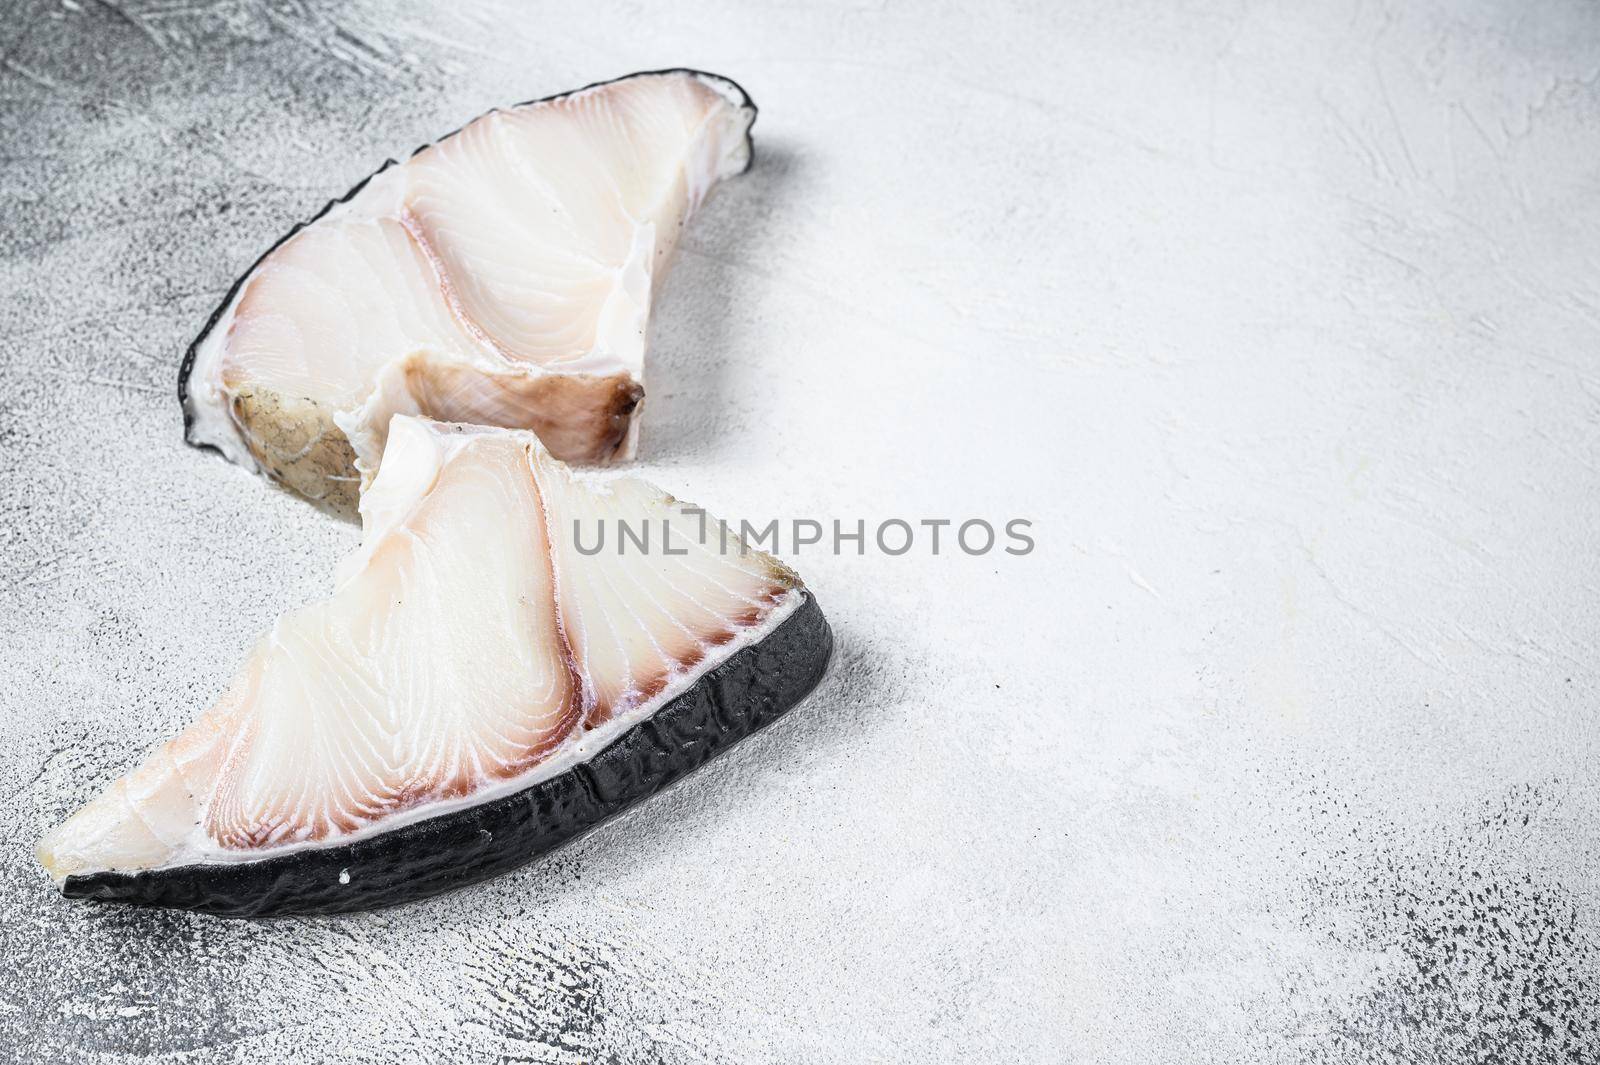 Raw Shark fish steaks on a kitchen table. White background. Top view. Copy space.